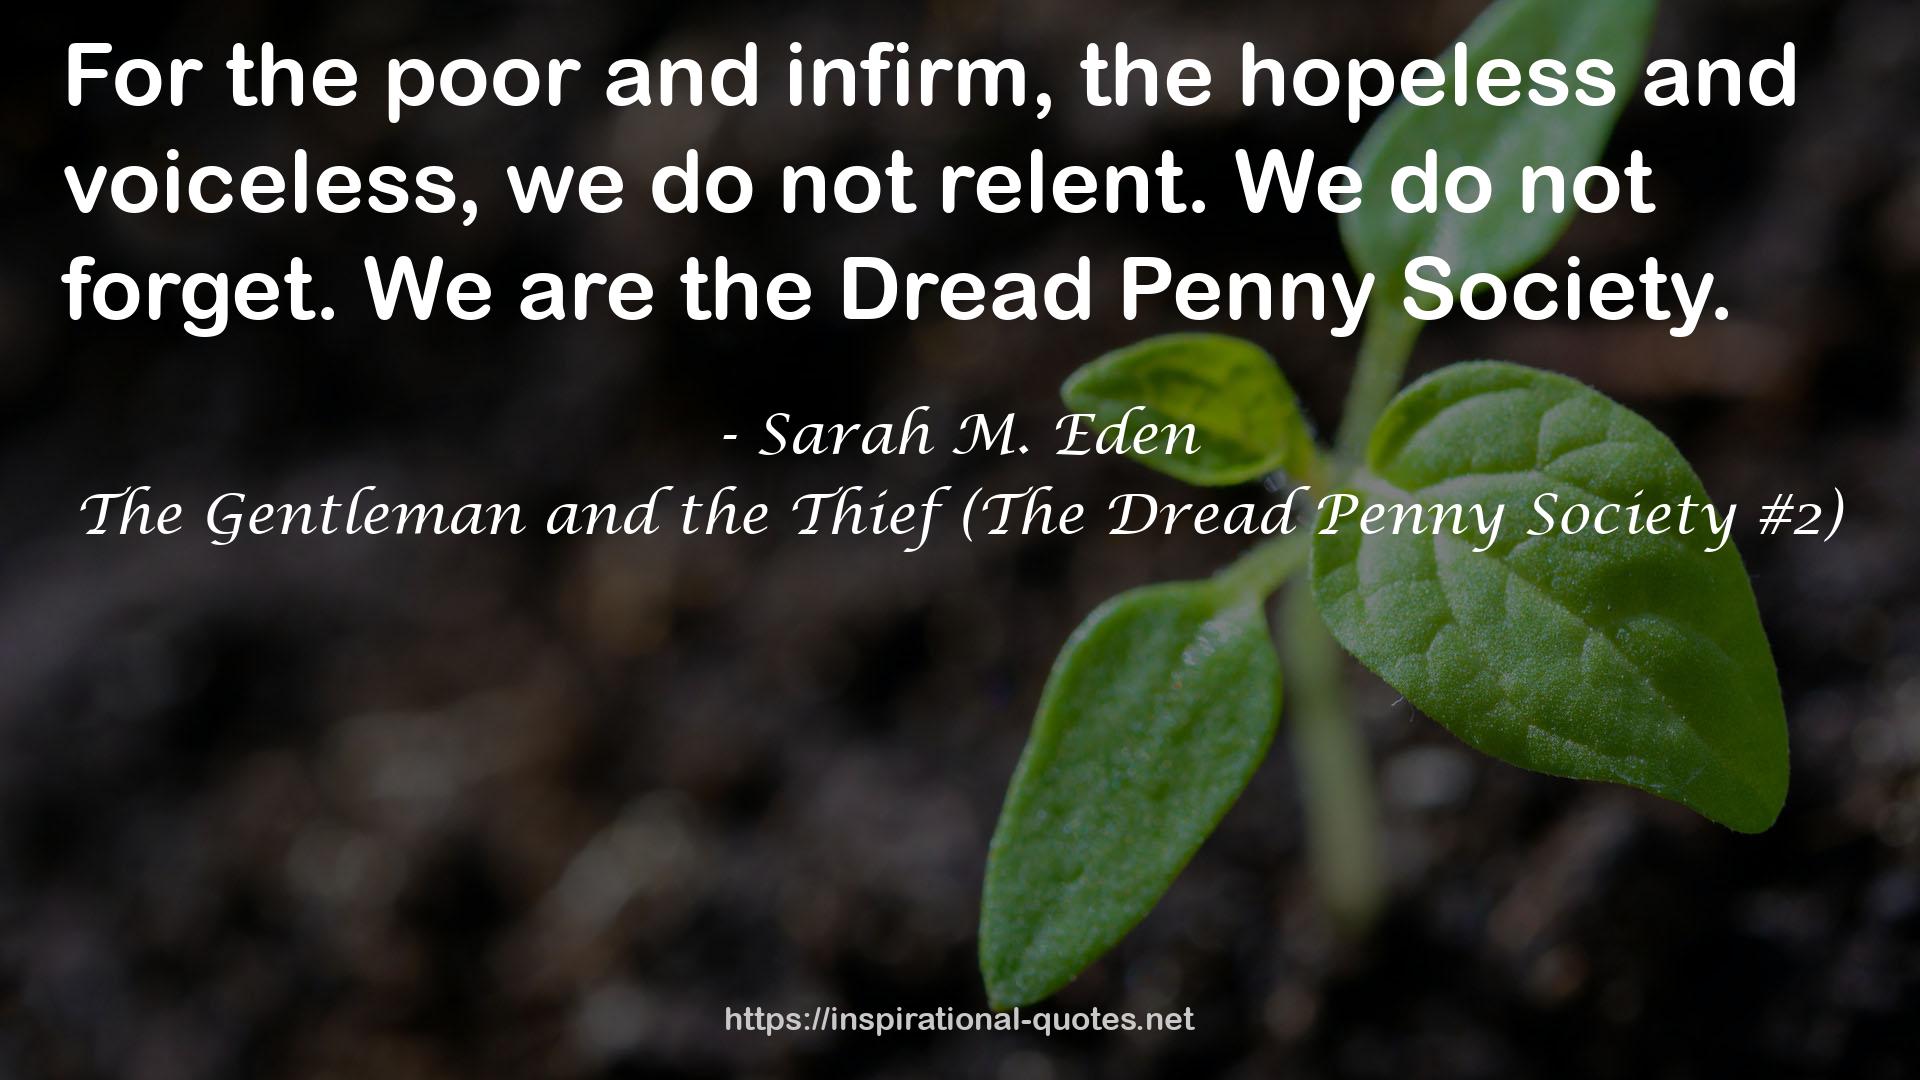 The Gentleman and the Thief (The Dread Penny Society #2) QUOTES